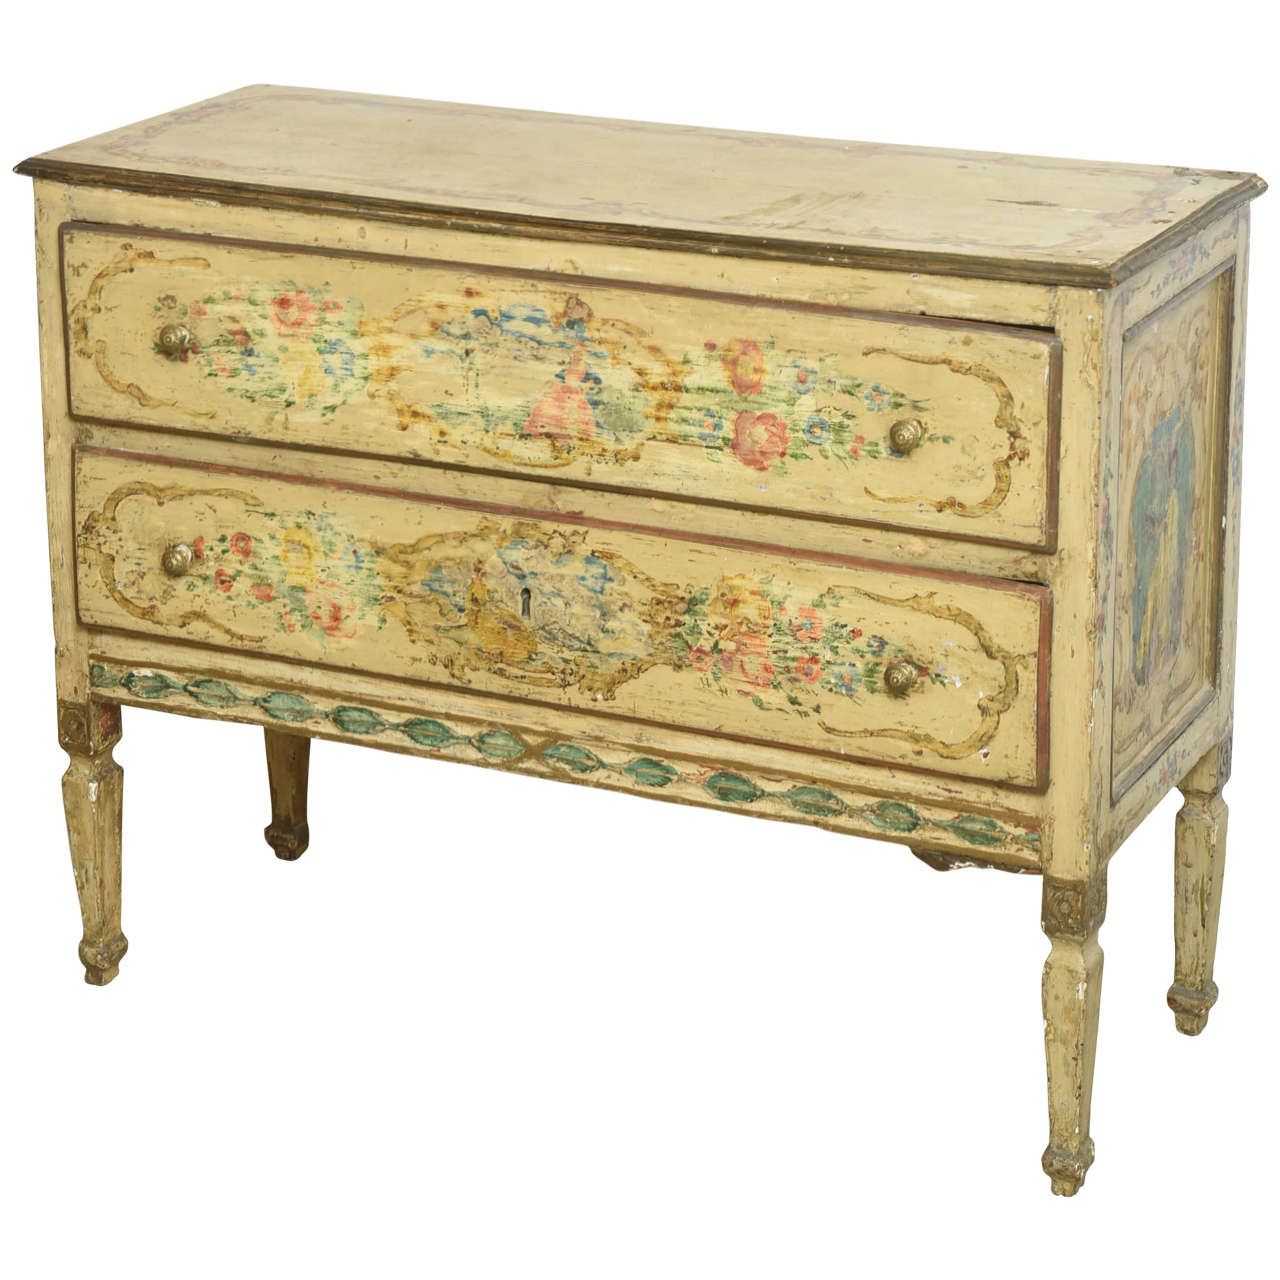 Italian Neoclassic Painted an Parcel-Gilt Two-Drawer Commode, Piedmontese